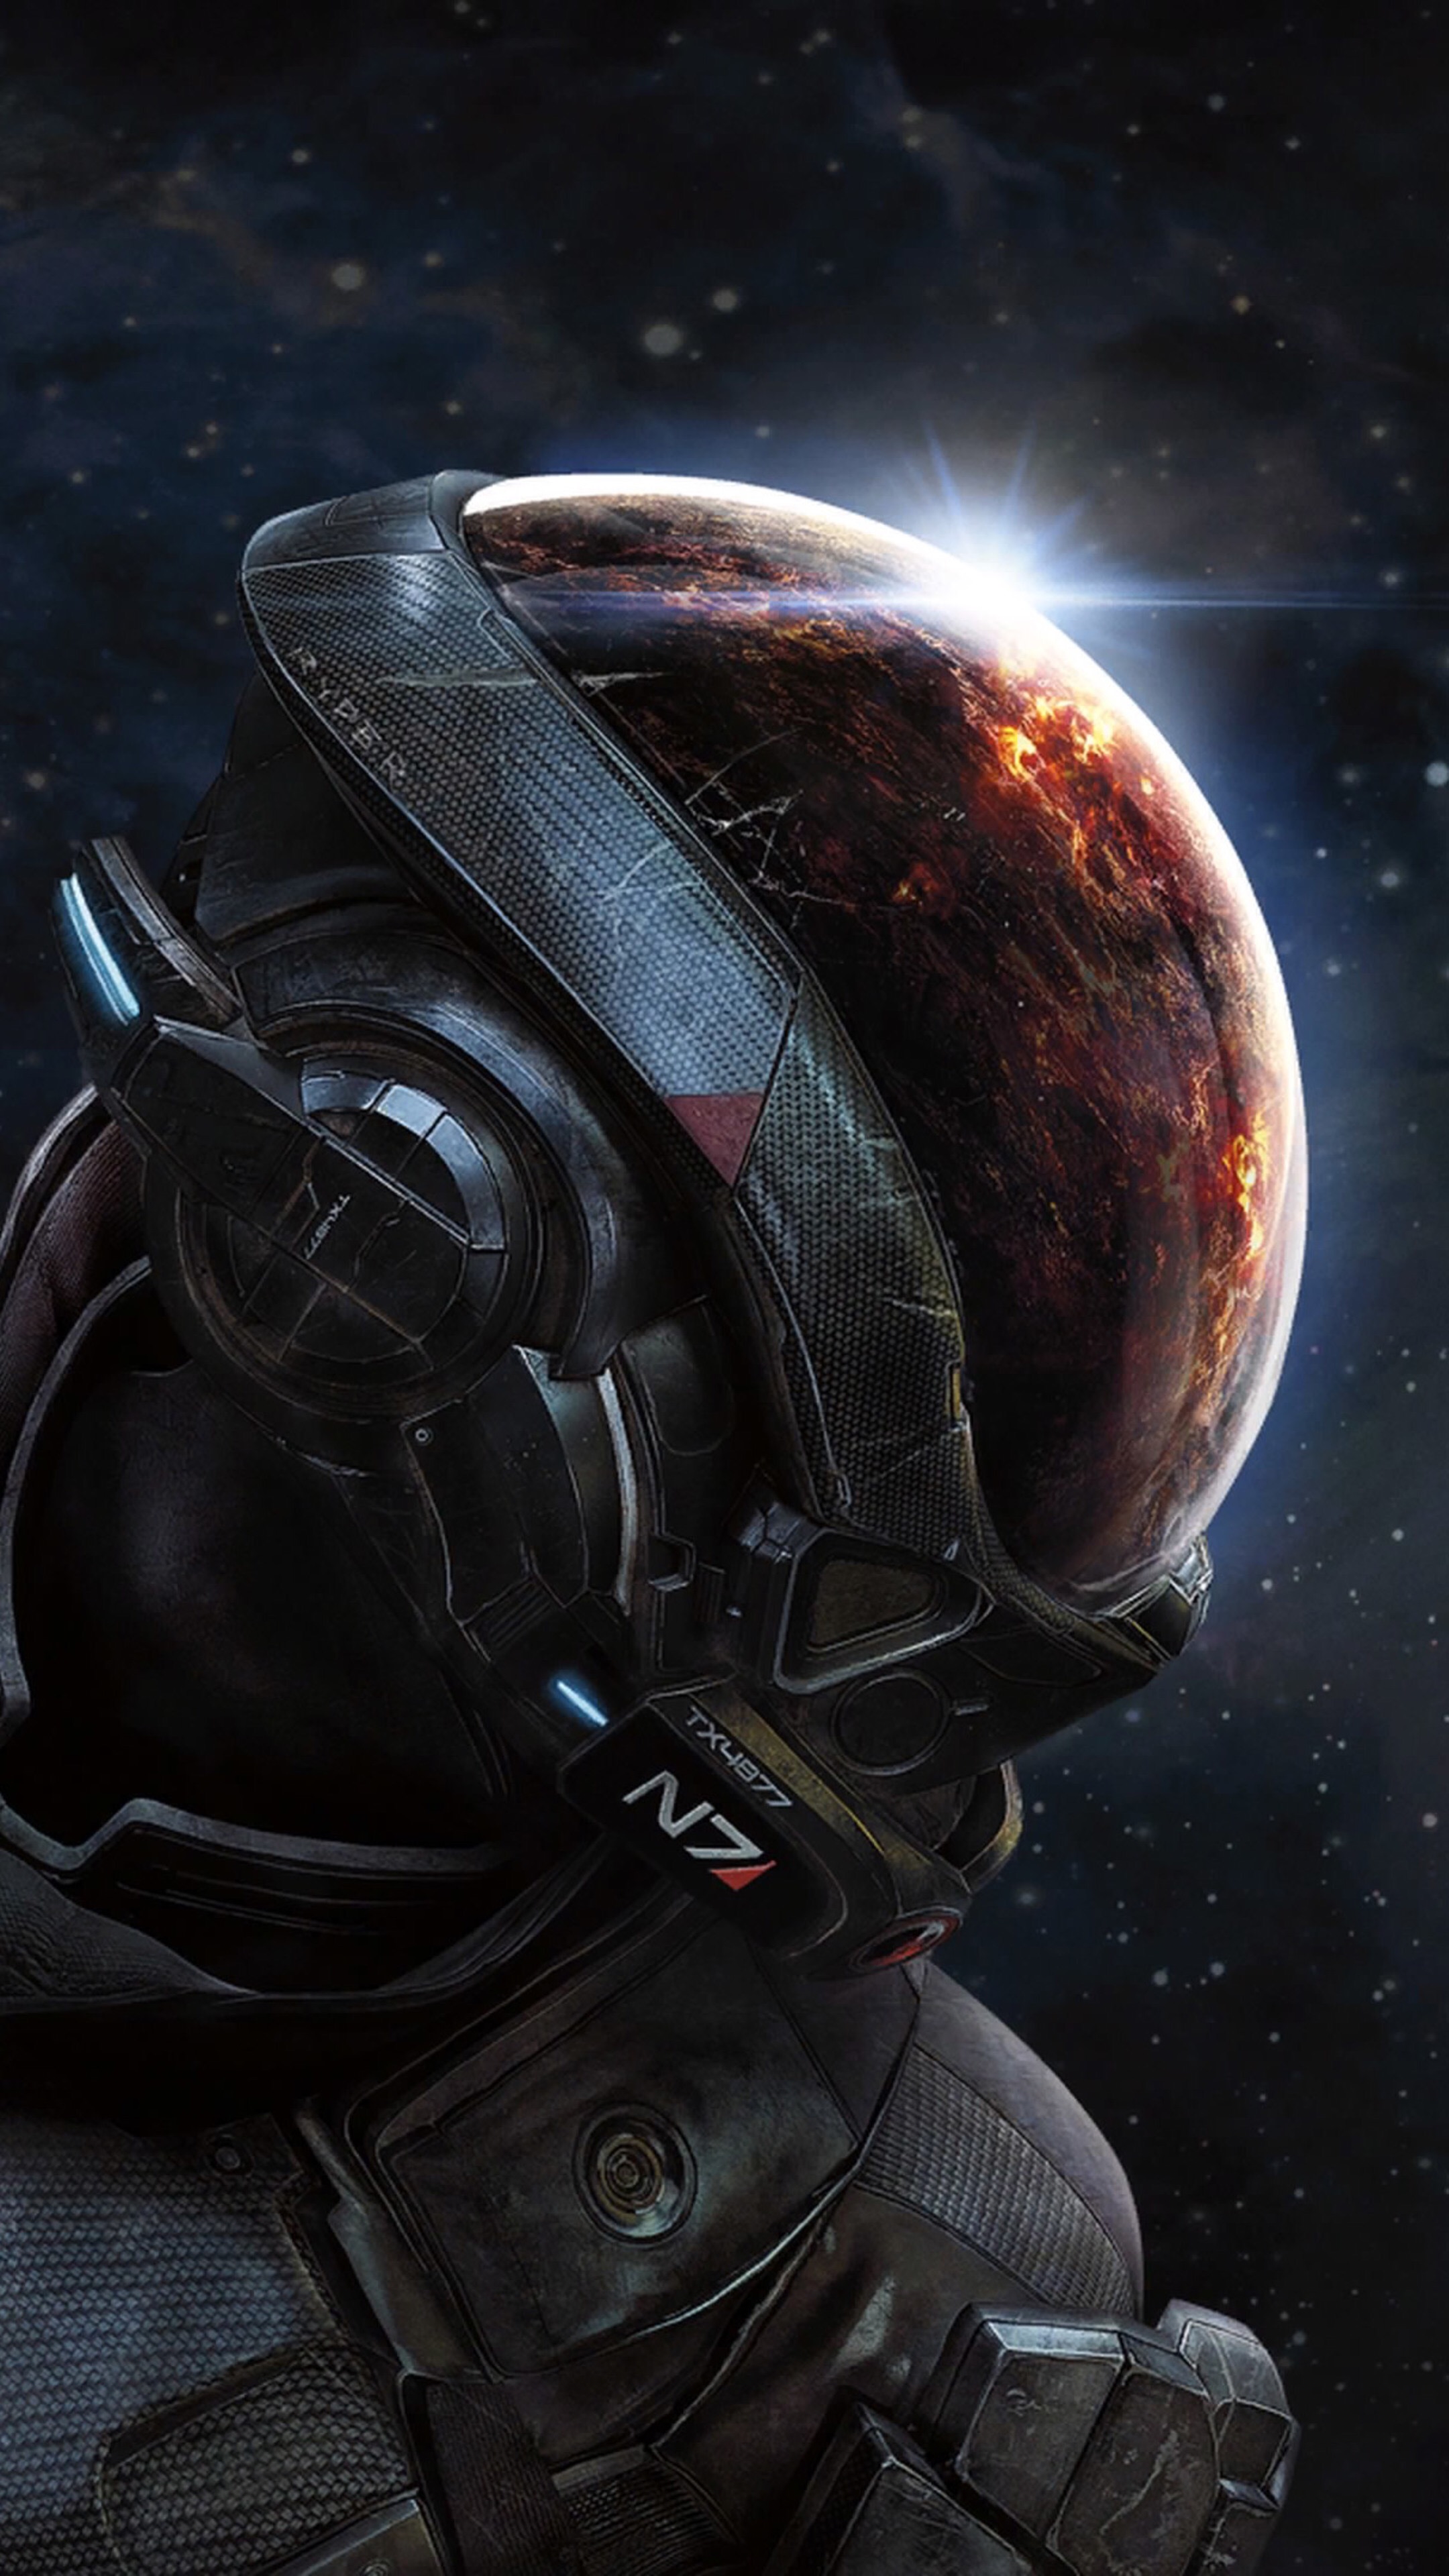 Mass Effect Legendary Edition Soundtrack Download Shared by BioWare